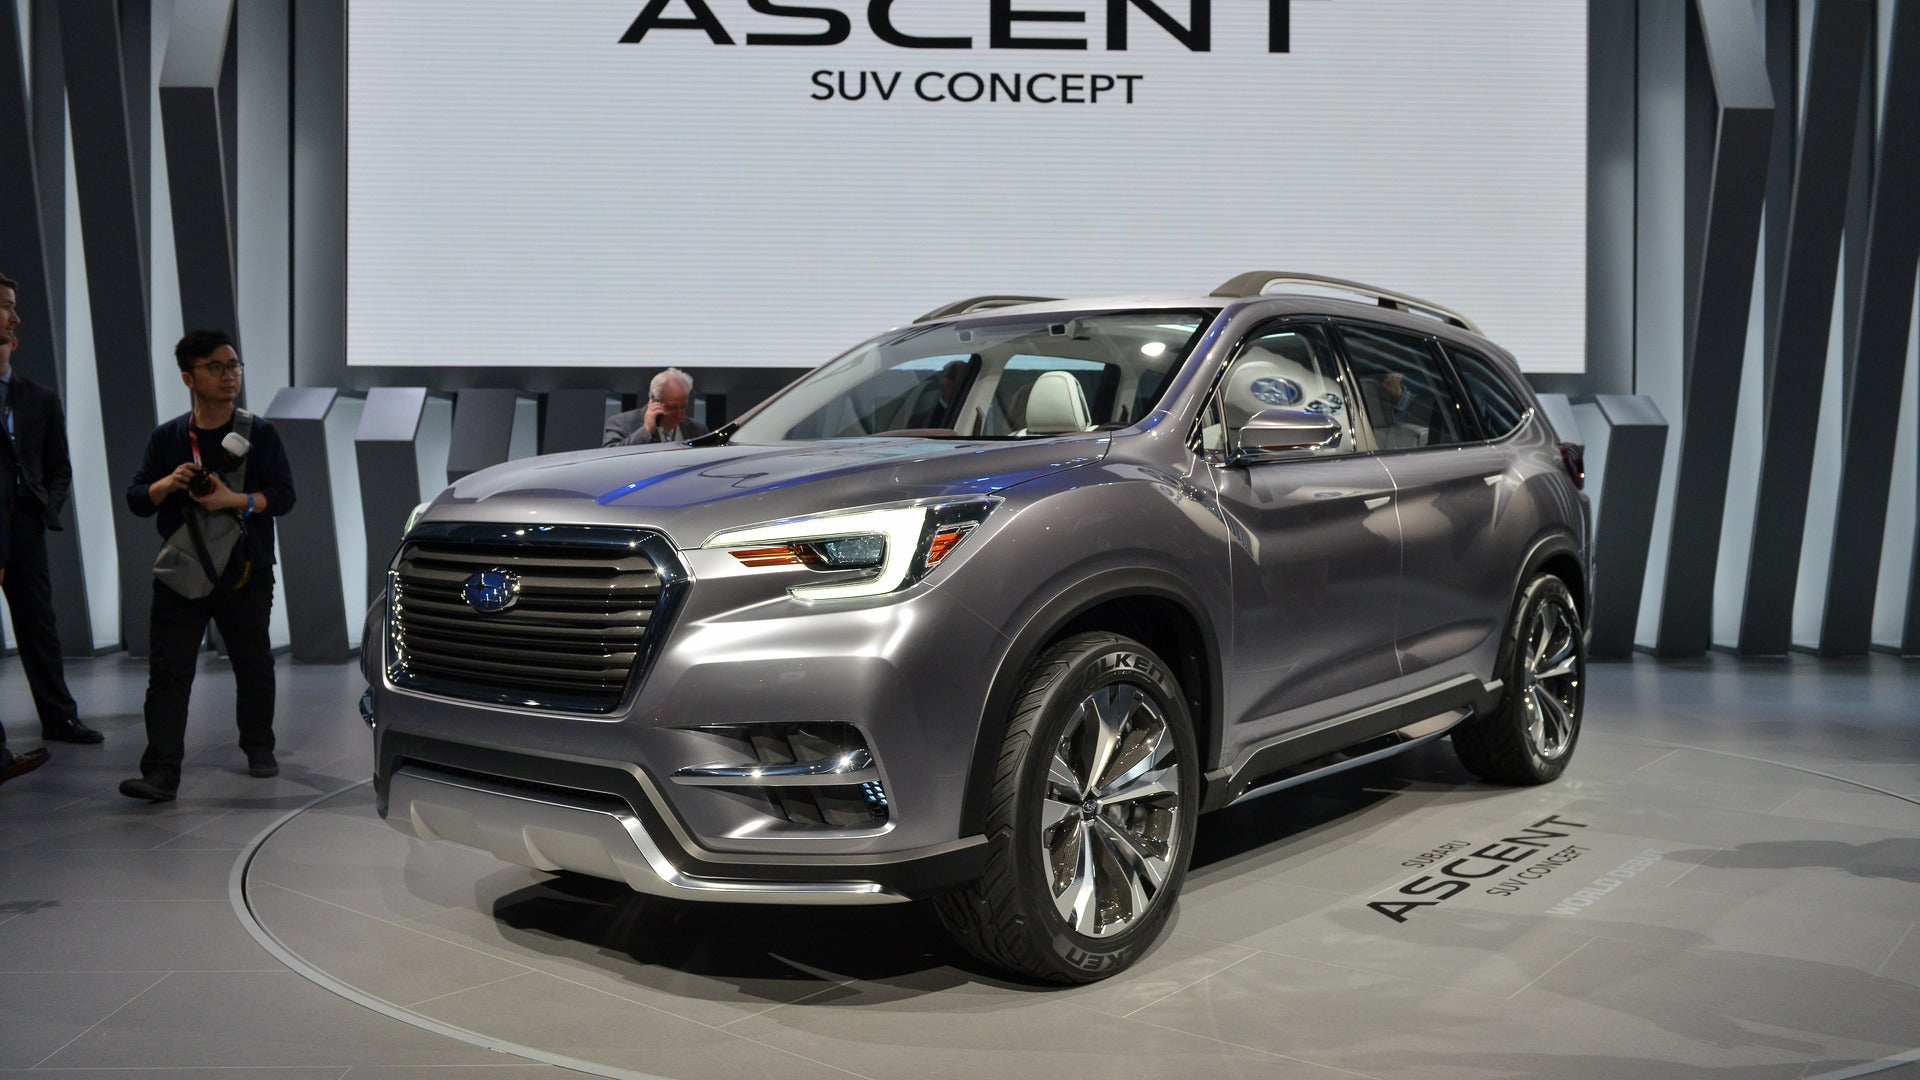 2018 Subaru Ascent SUV Revealed in New York